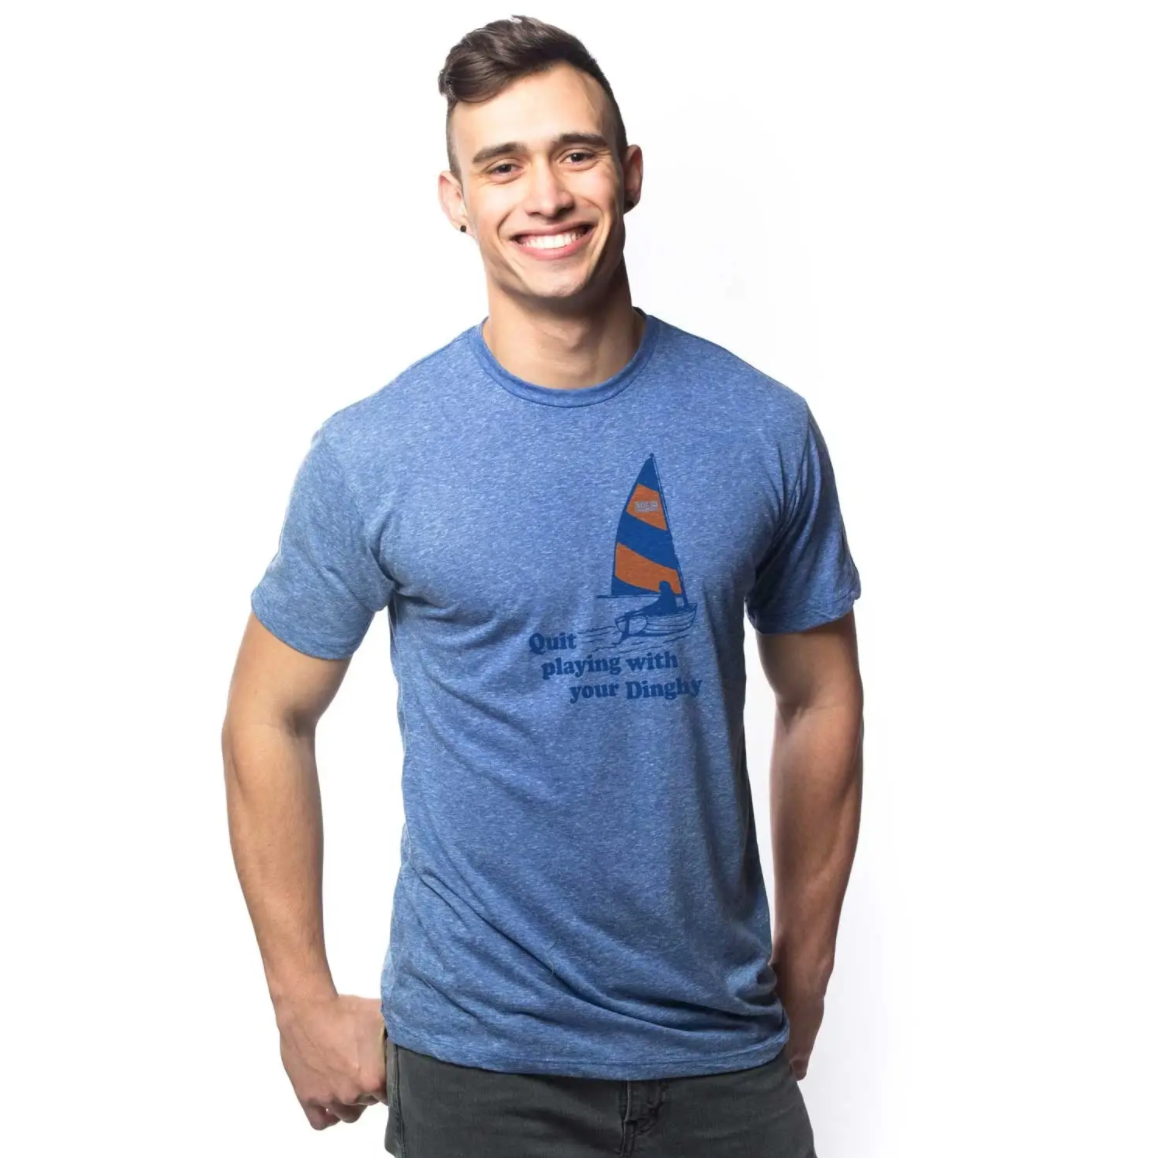 Quit Playing With Your Dinghy Men's Cotton T-Shirt